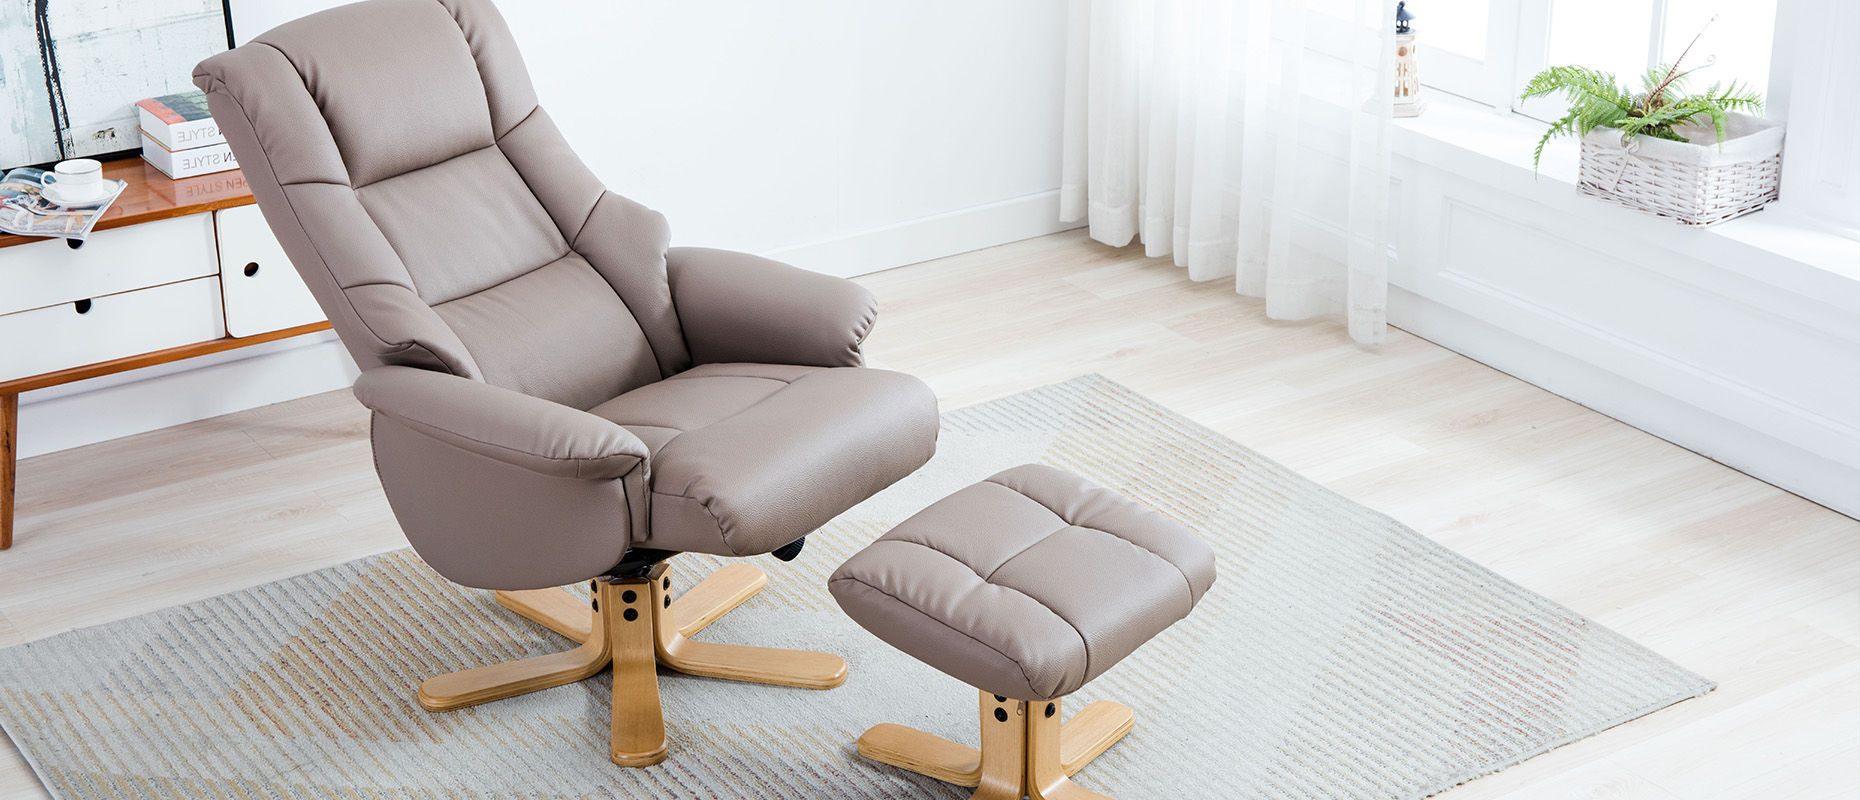 Recliners at Forrest Furnishing